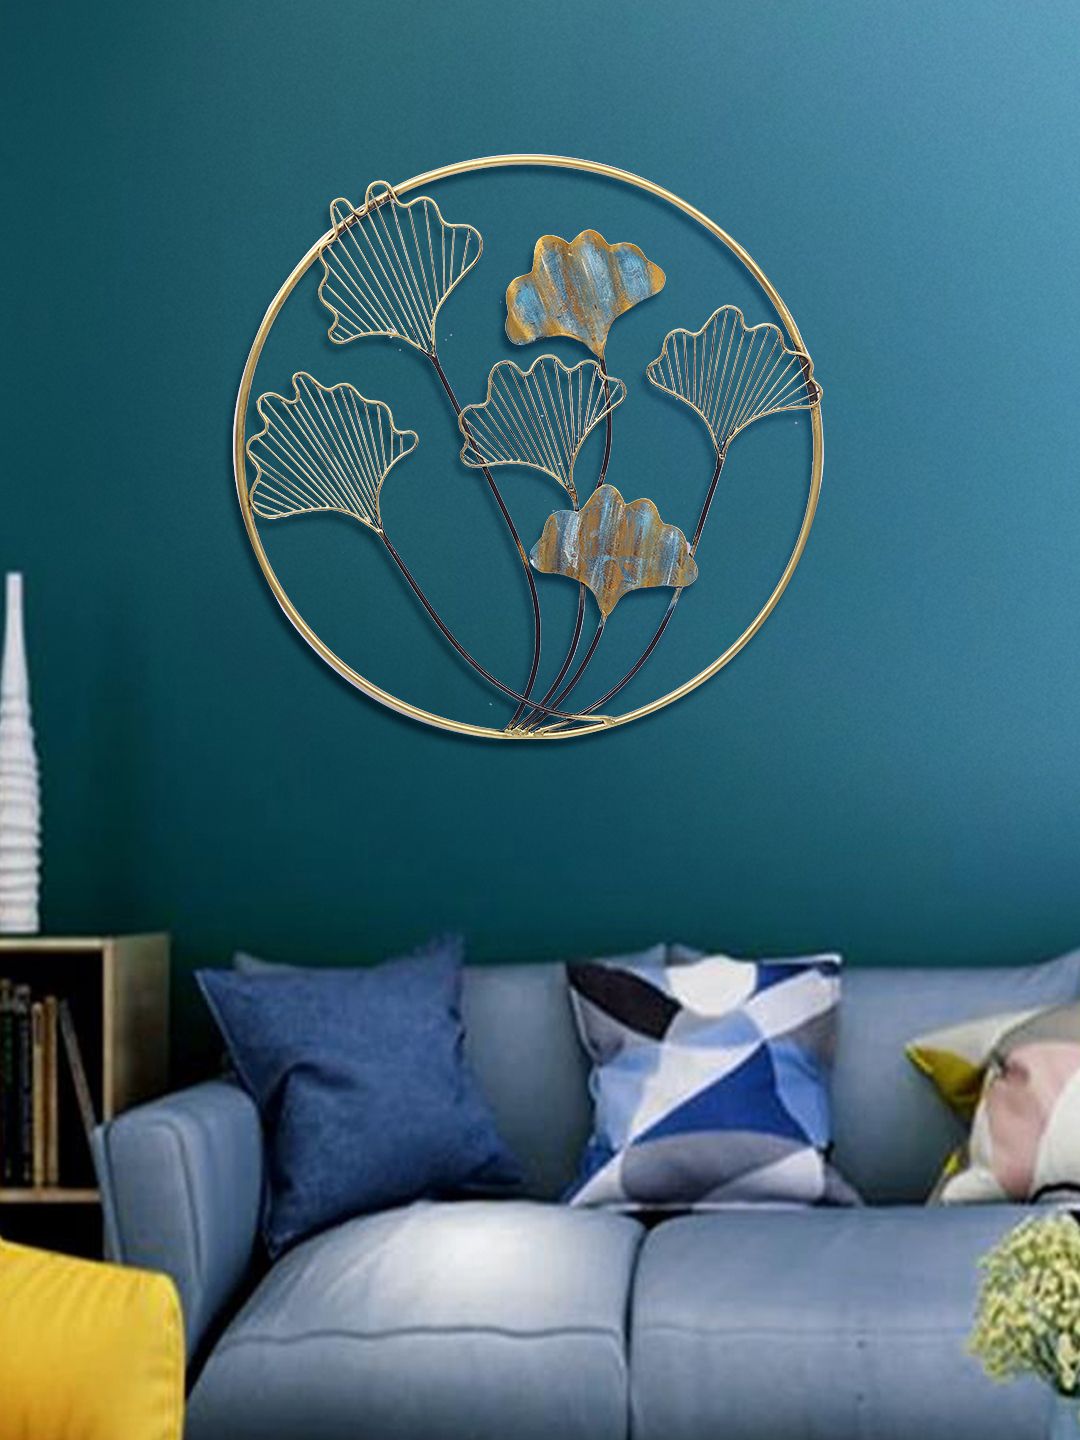 Aapno Rajasthan Gold-Toned & Blue Round Ring Ginkgo Leaf Wall Decor Price in India